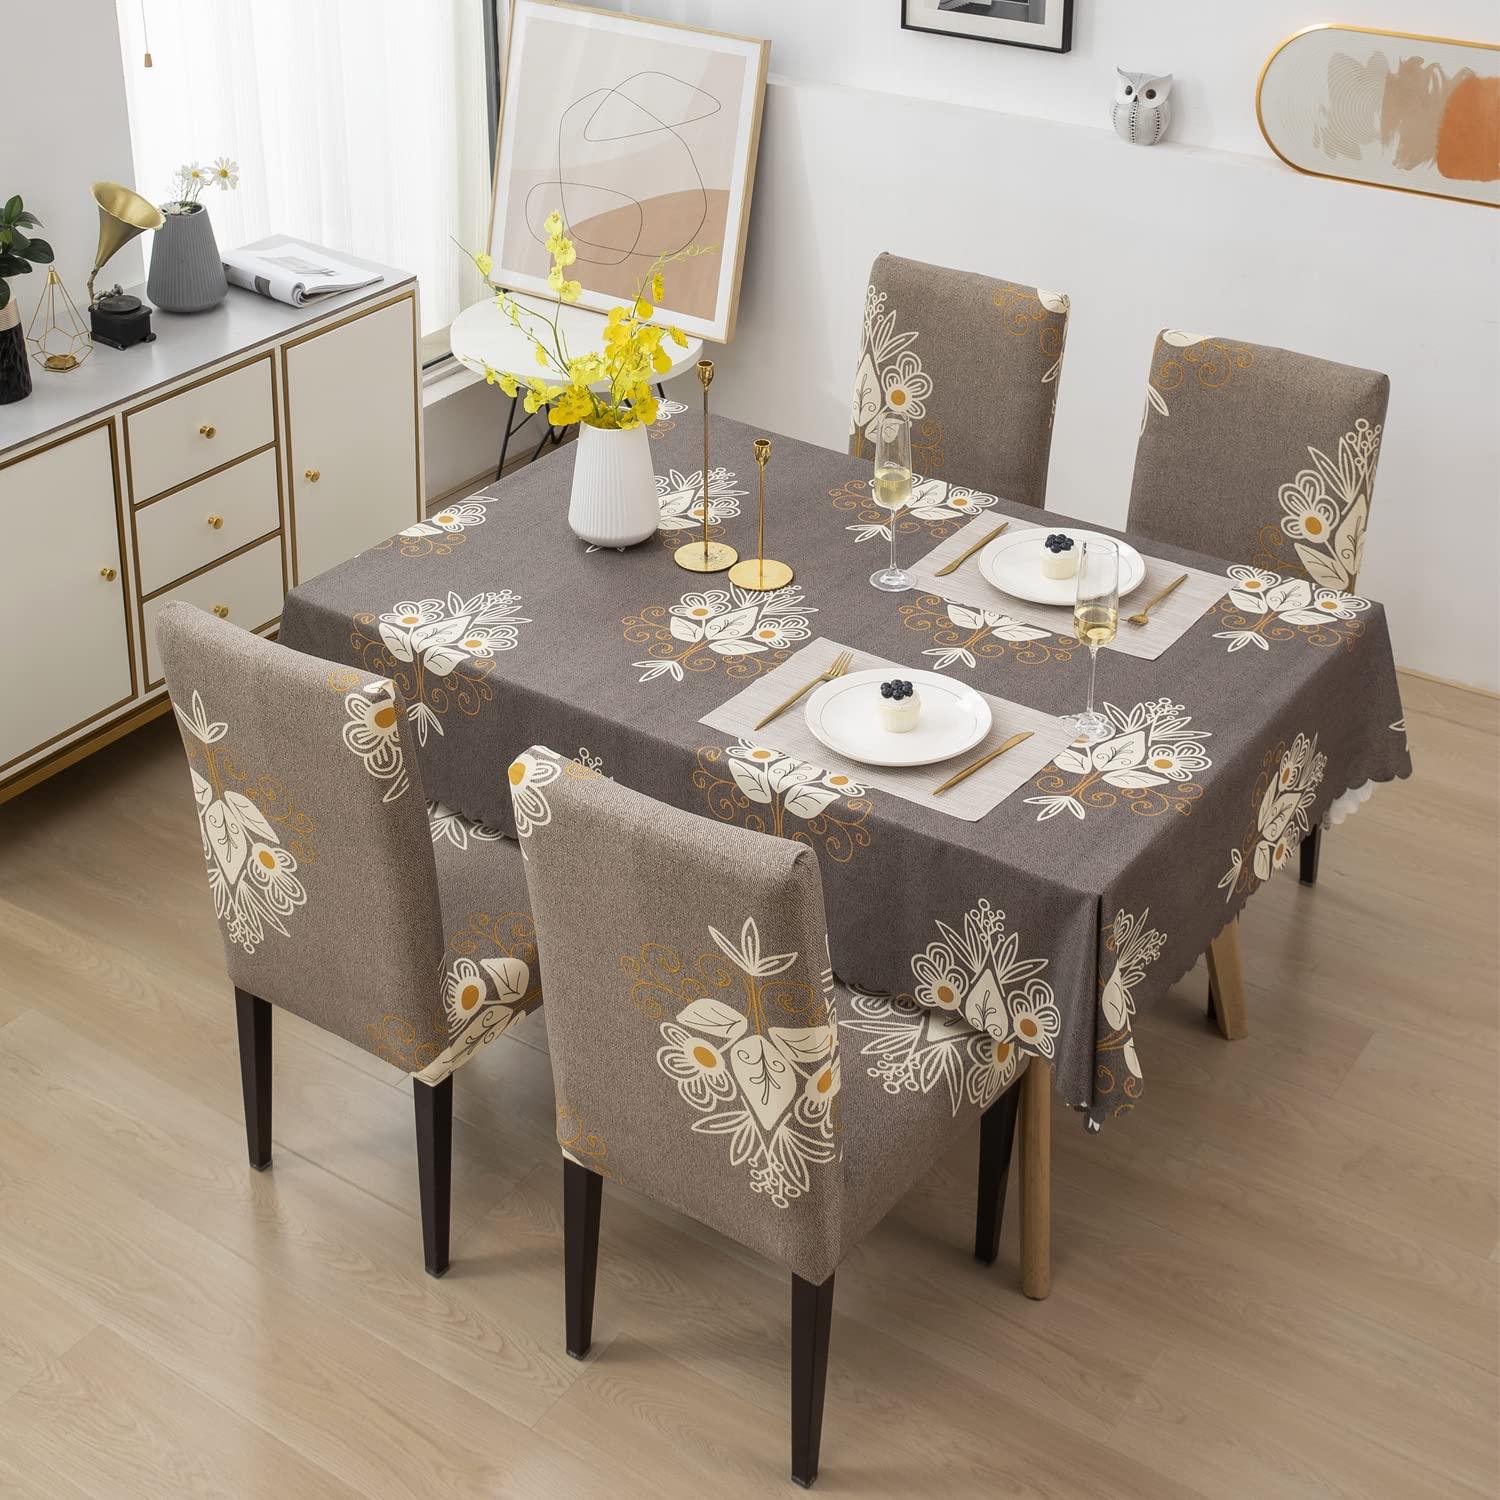 Premium Dining Table & Chair Cover Combo - Beige Brocade